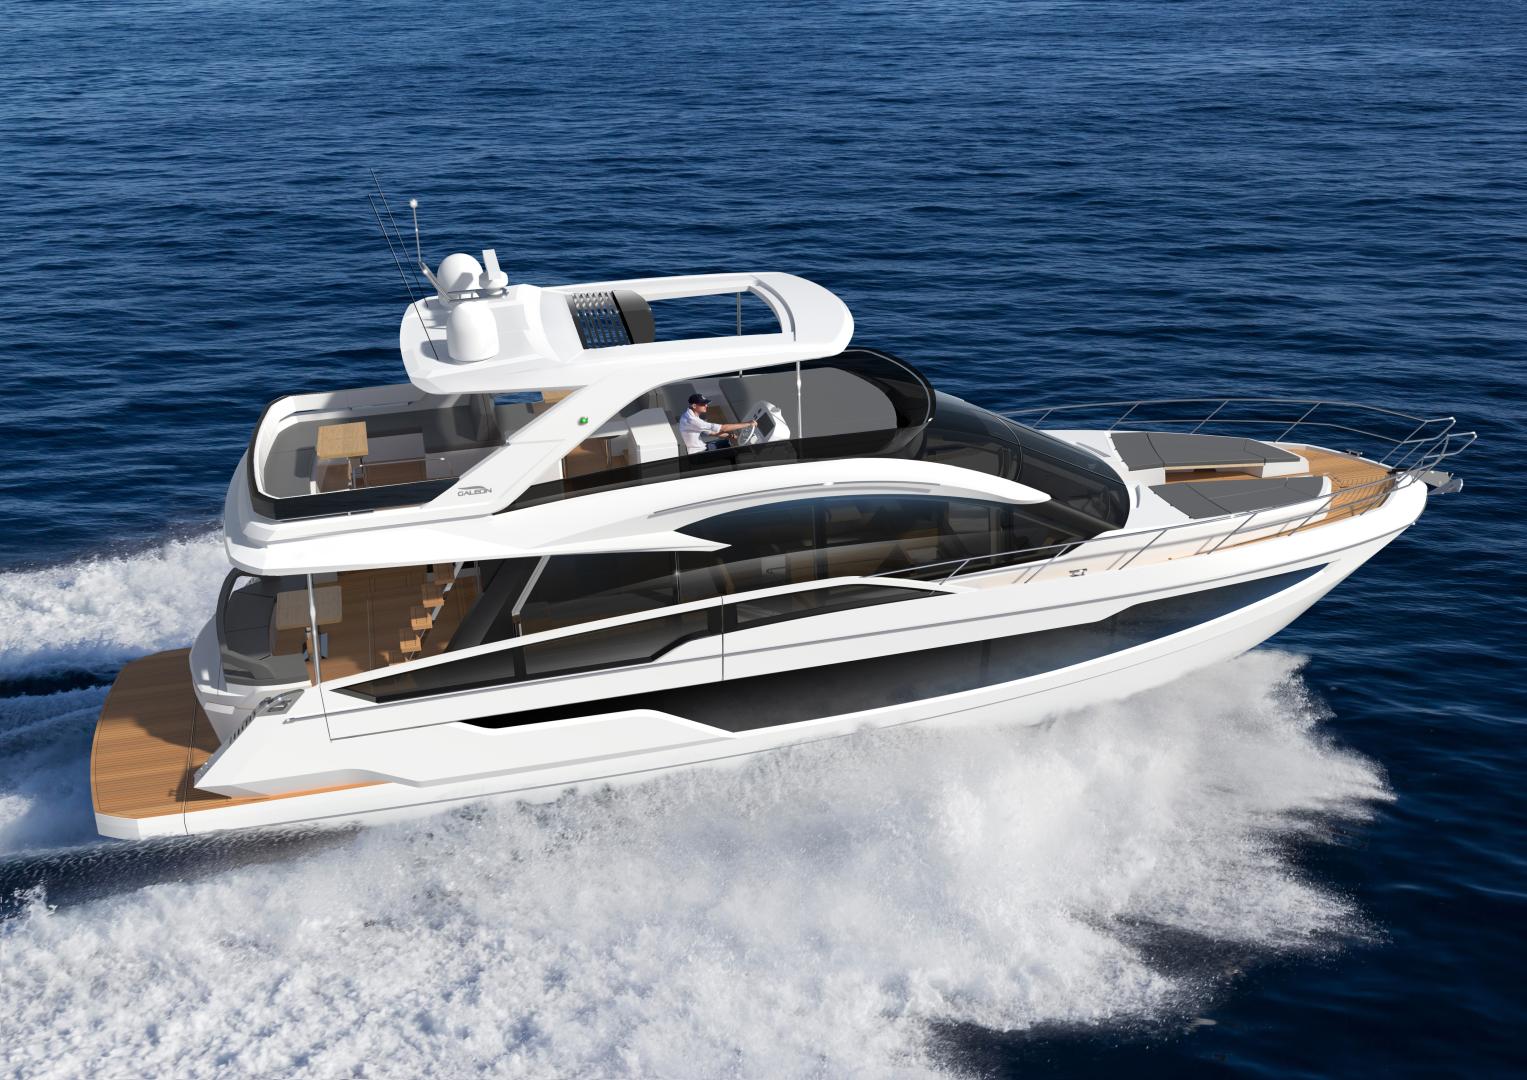 Galeon selects Volvo Penta engine for its new ‘game-changing’ yacht